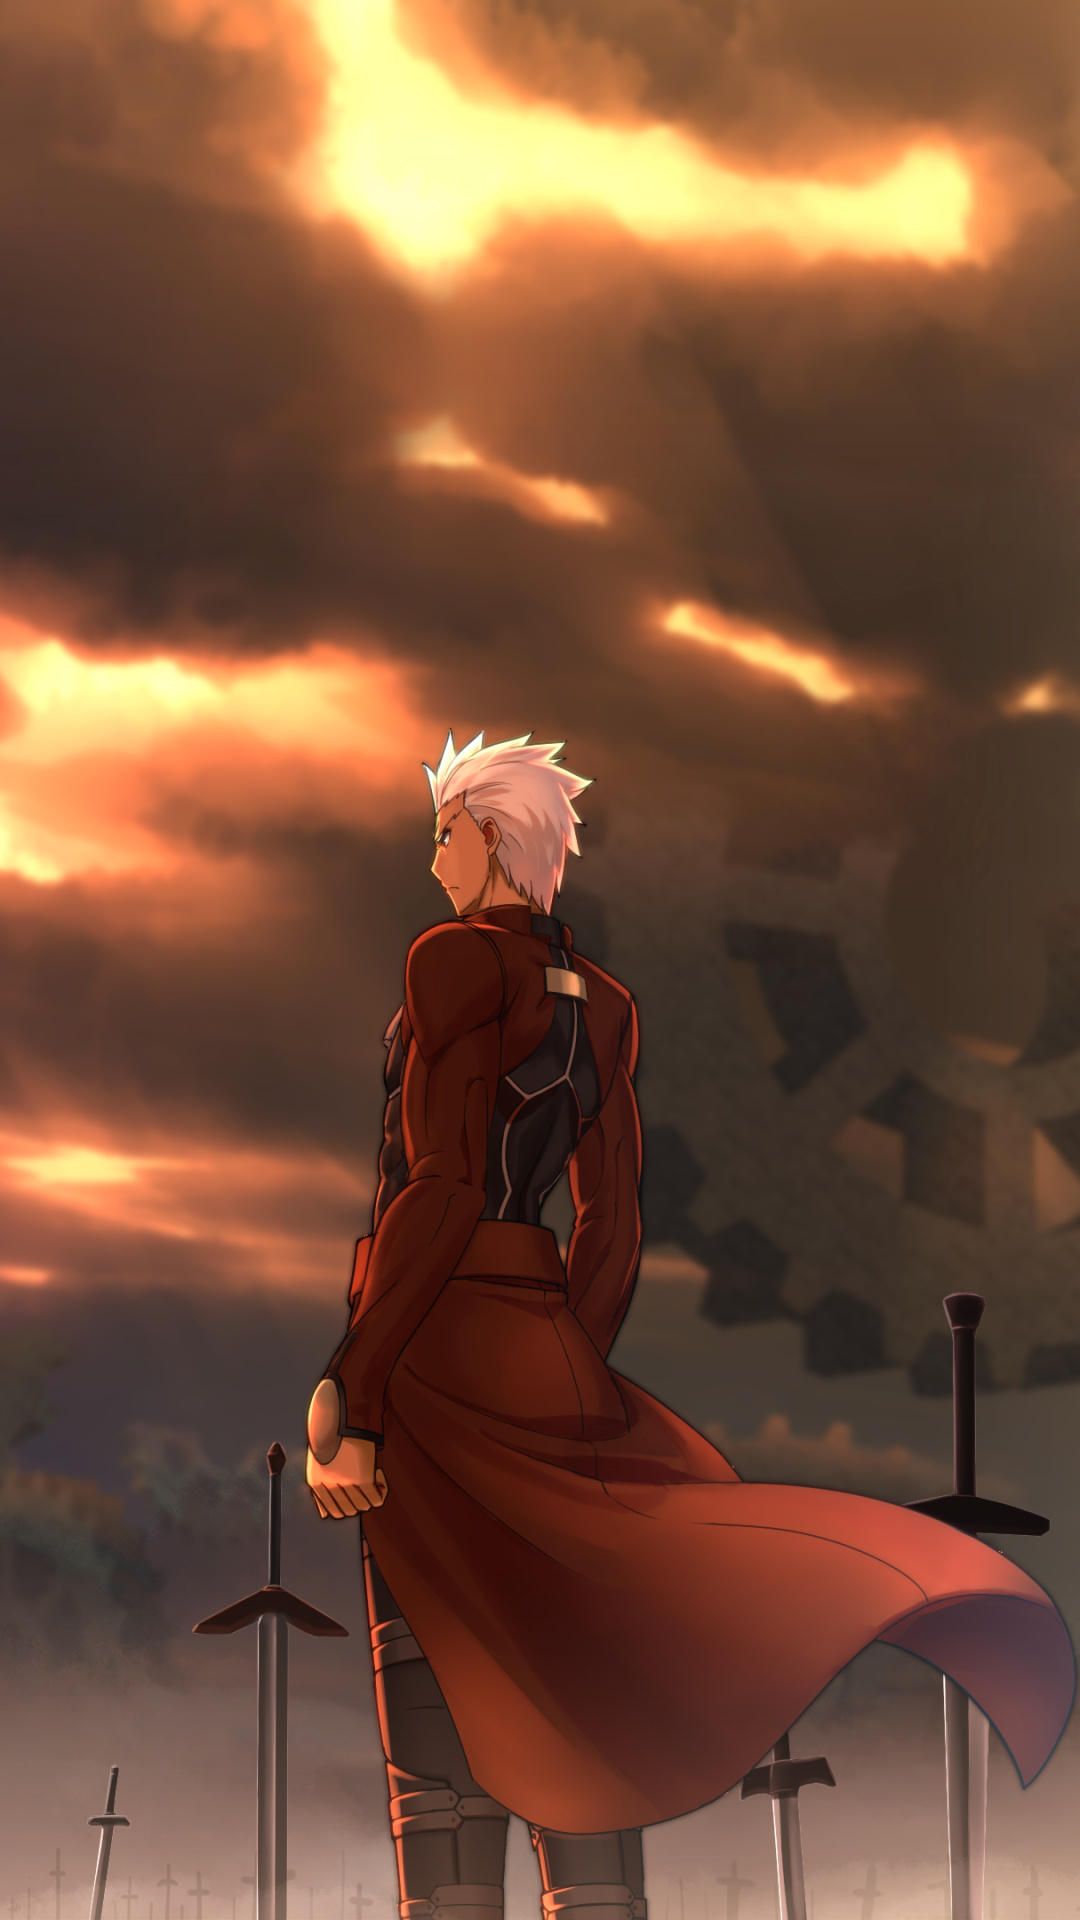 Fate/stay night: Unlimited Blade Works anime, Epic fantasy world, Magical battles, Heroic spirits, 1080x1920 Full HD Handy